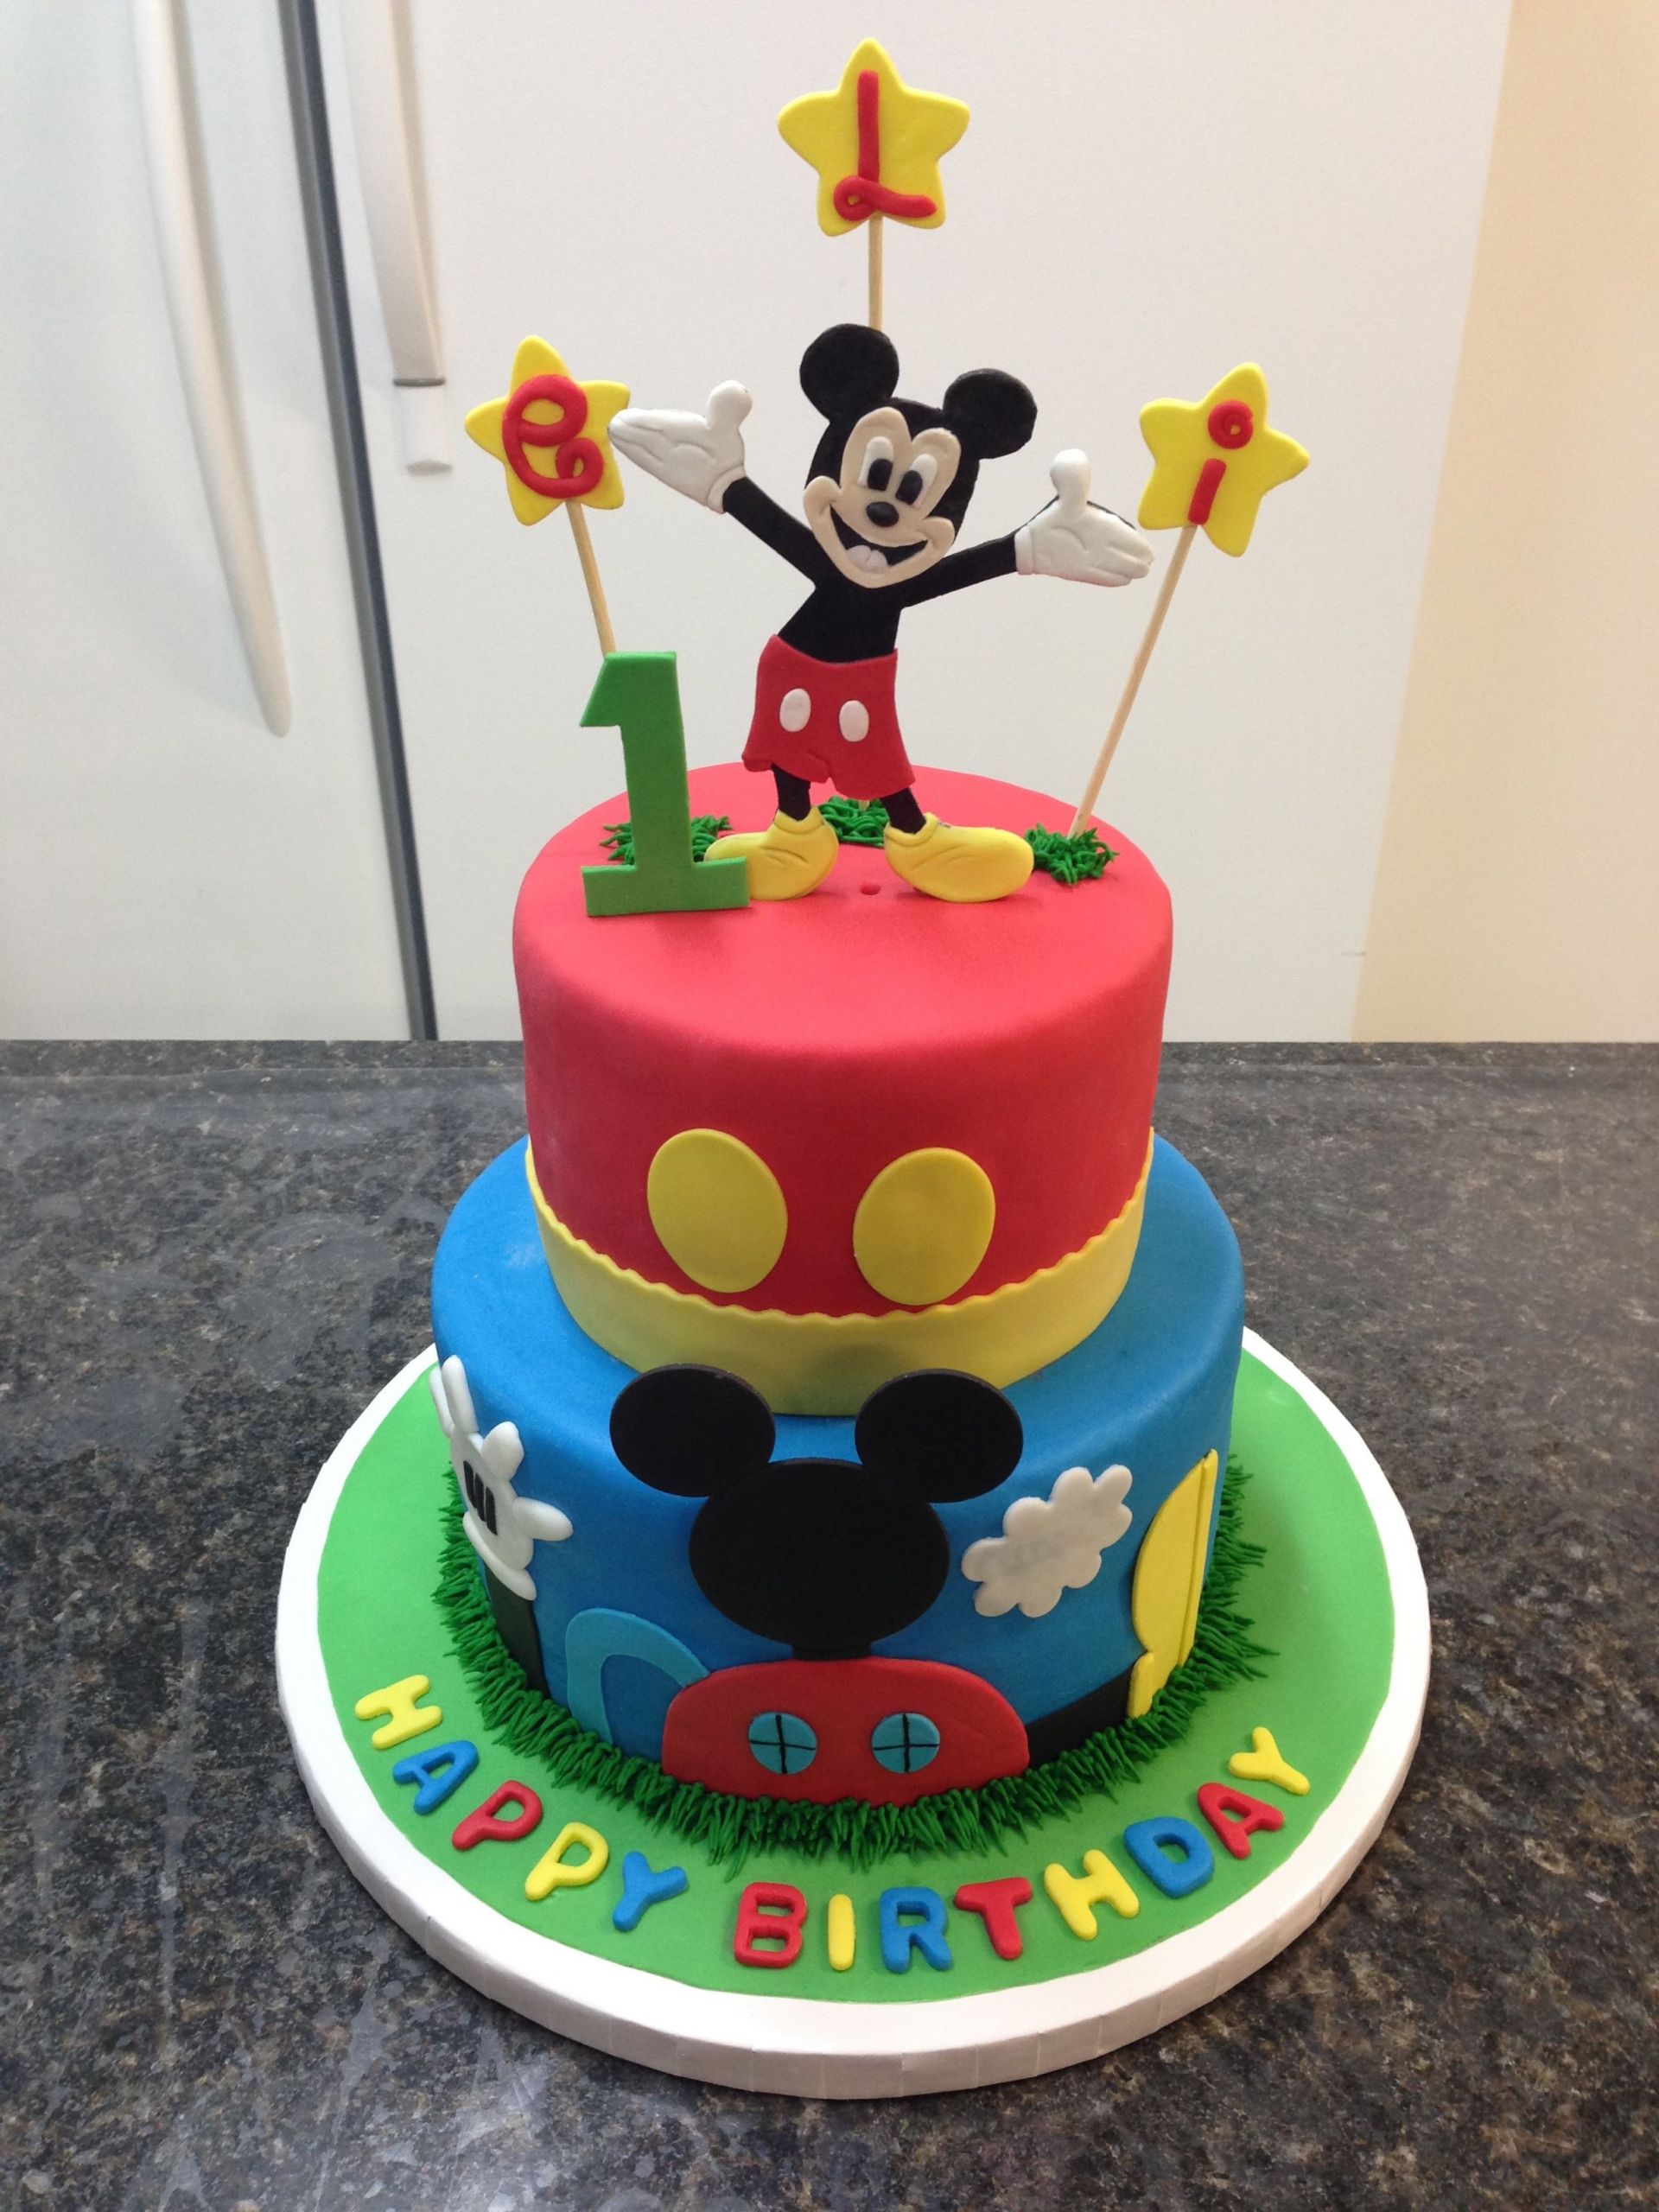 Mickey Mouse Birthday Cake Decorations
 Children s Birthday Cakes Mickey Mouse 1st Birthday Cake